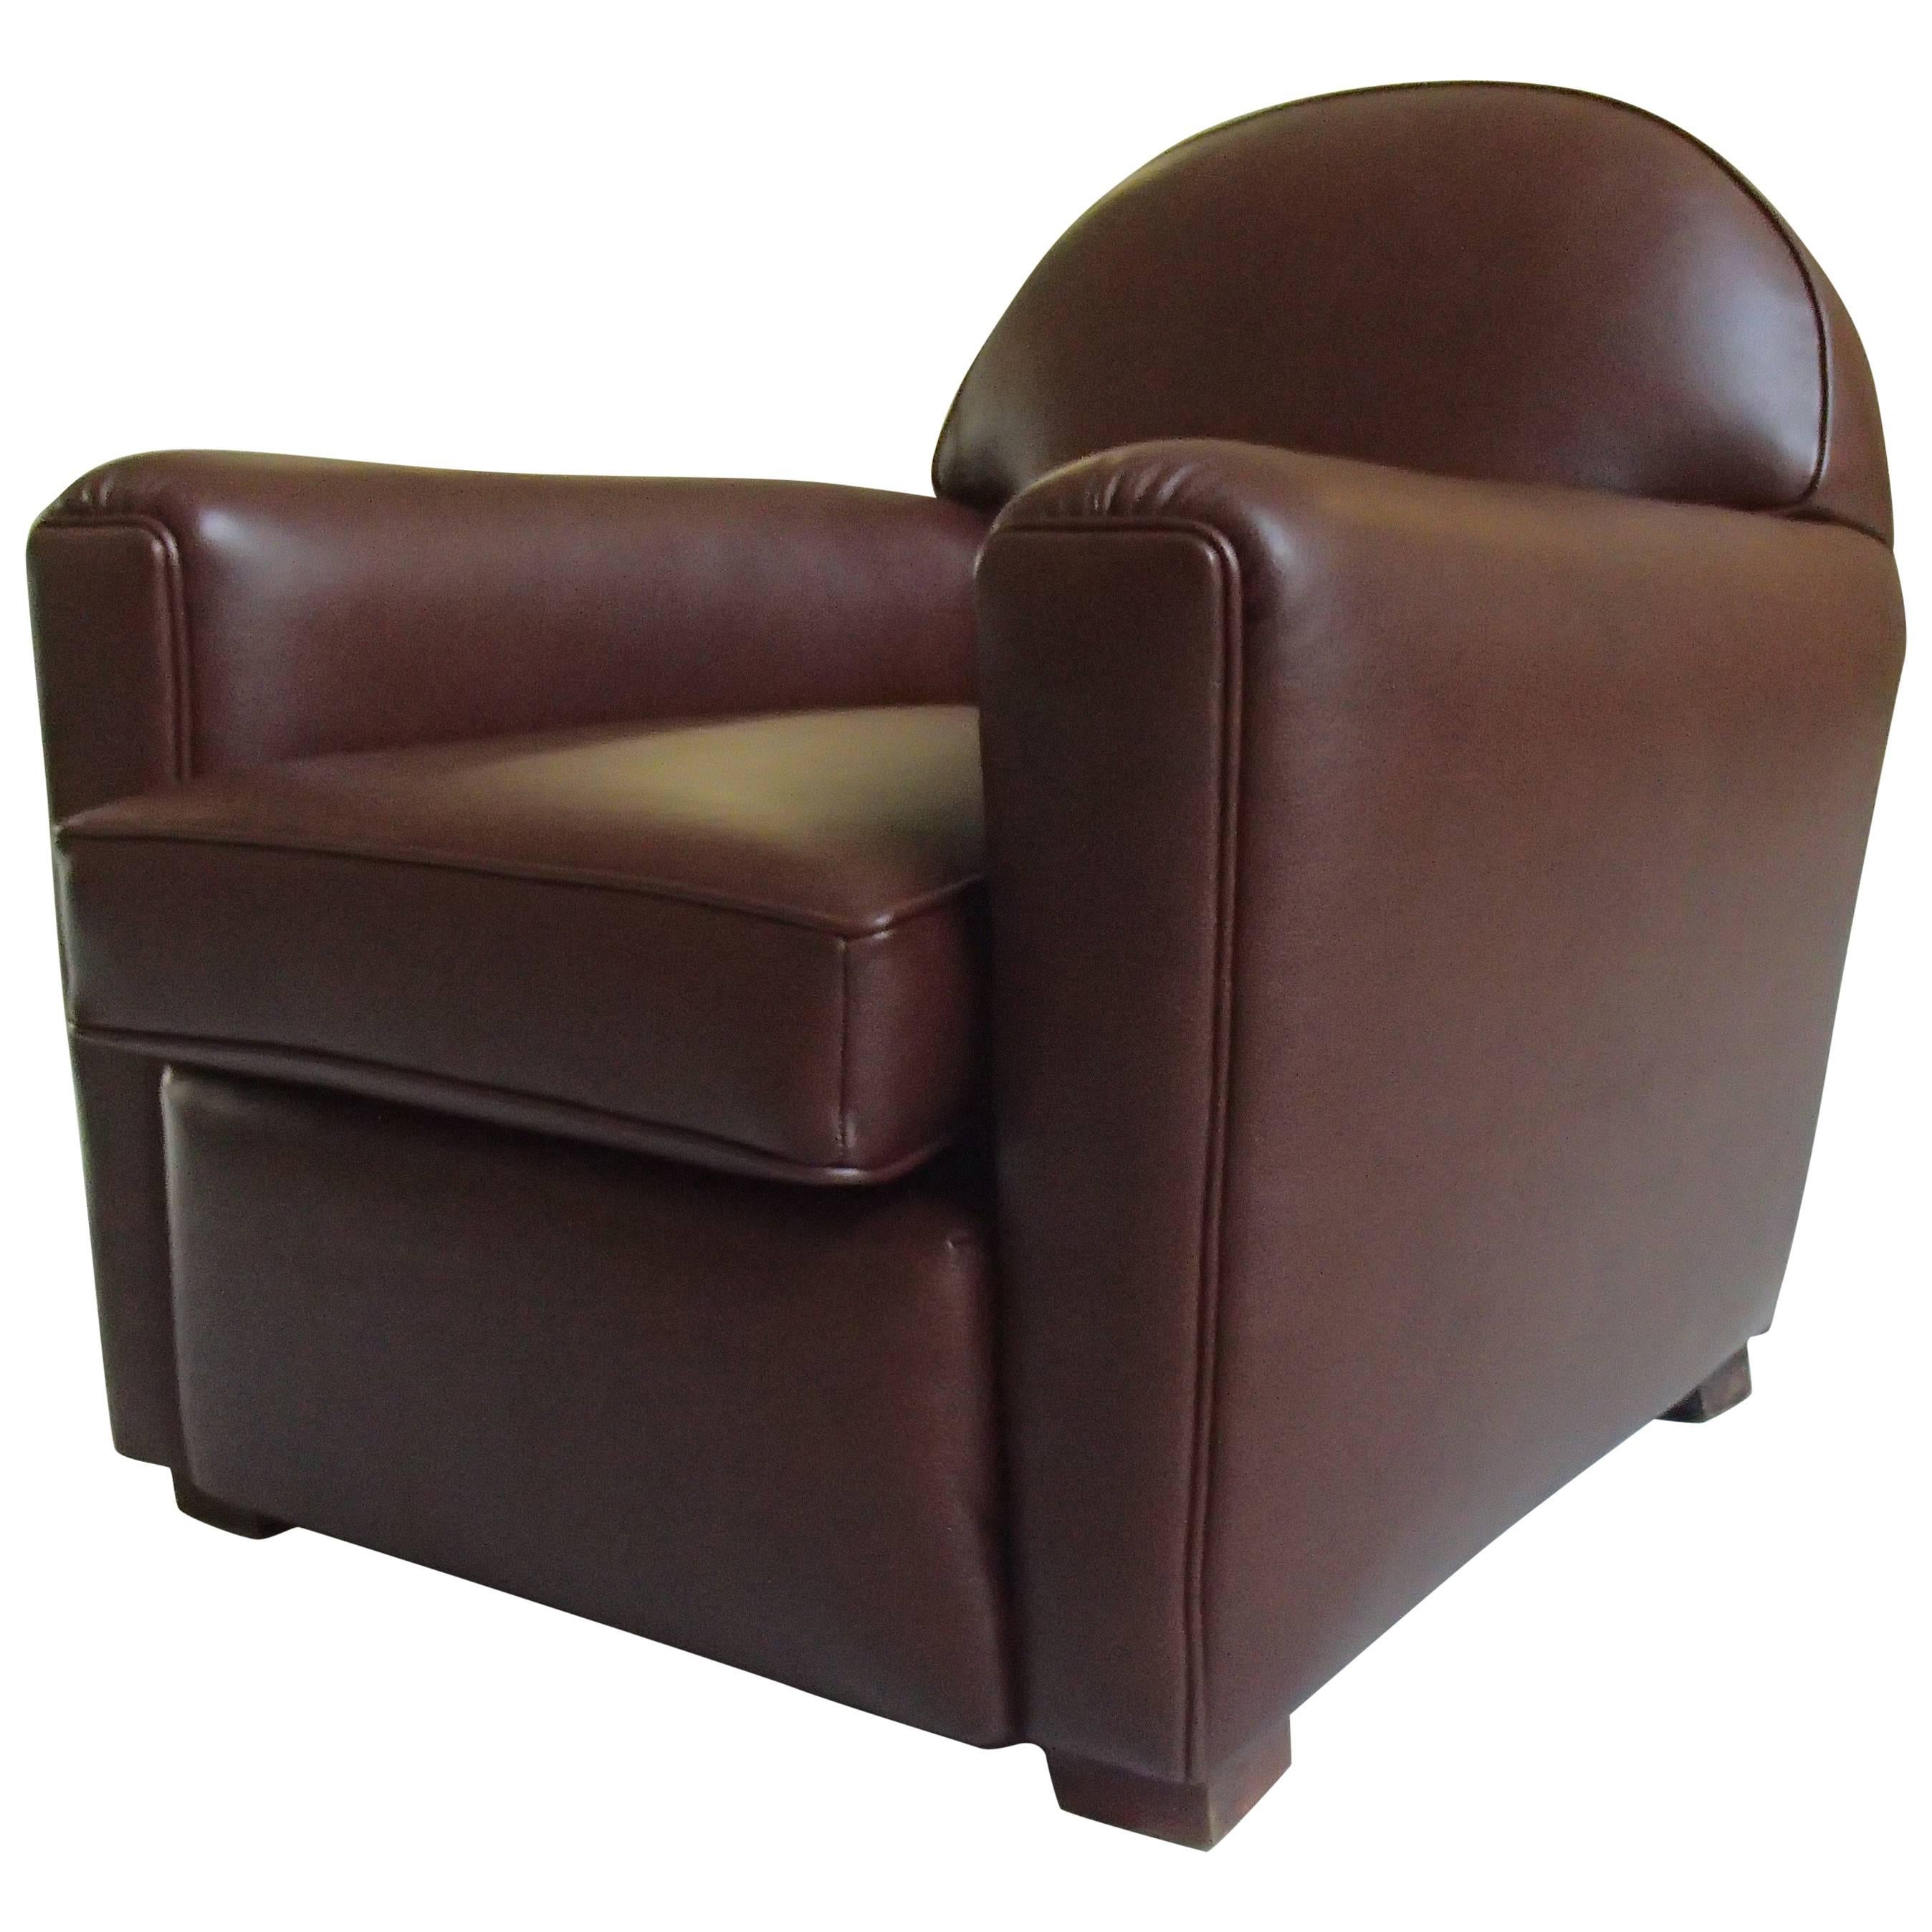 Art Deco Club Chair Completely Restored and Recovered with Brown Leather